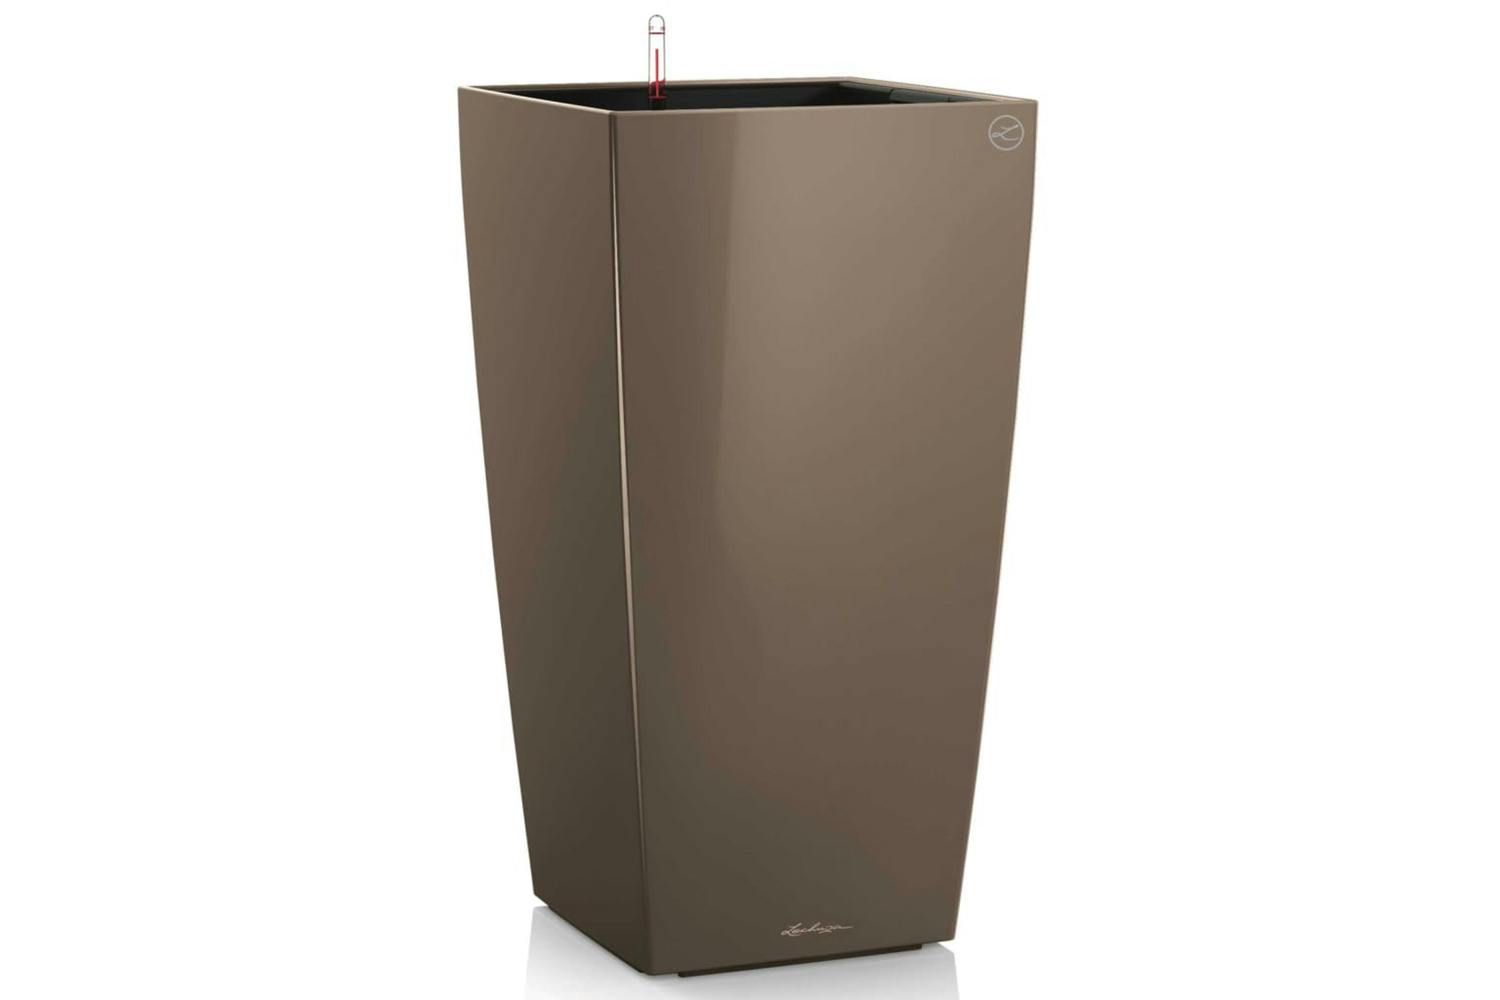 Lechuza 421492 Planter Cubico 40 All-in-one High-gloss Taupe 18215